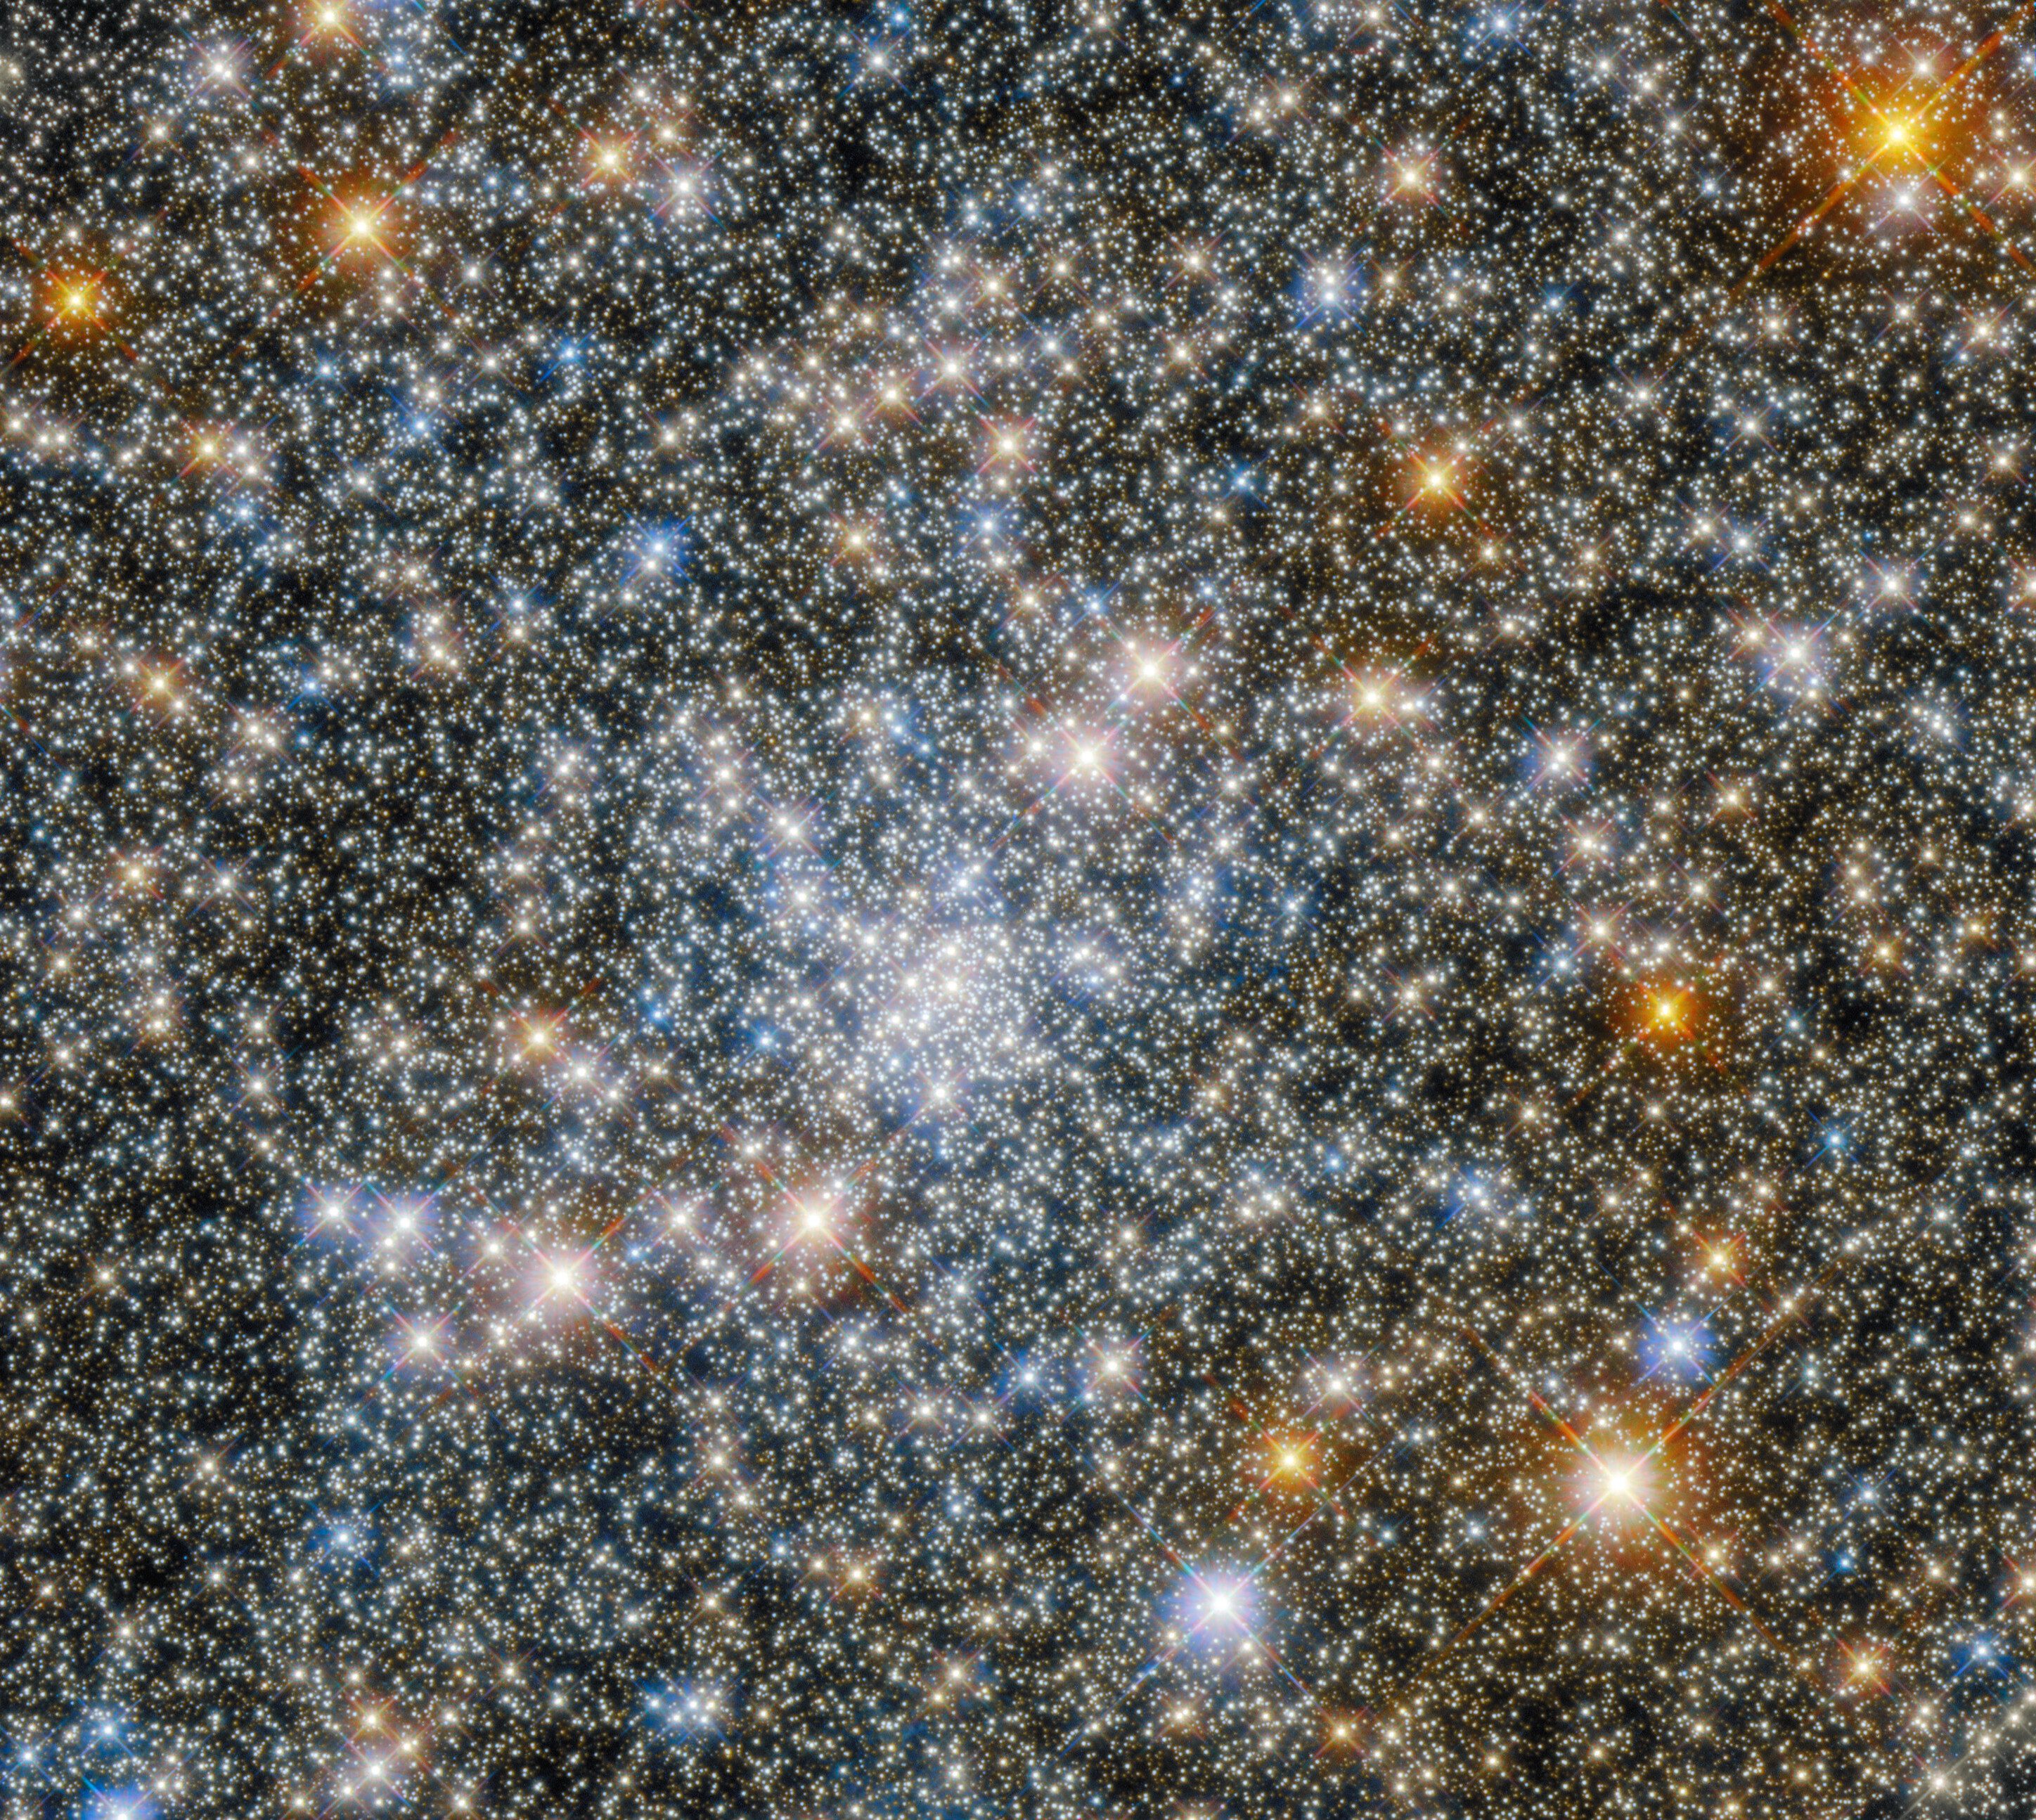 The latest view of NGC 6540 from Hubble. Image Credit: ESA/Hubble & NASA, R. Cohen